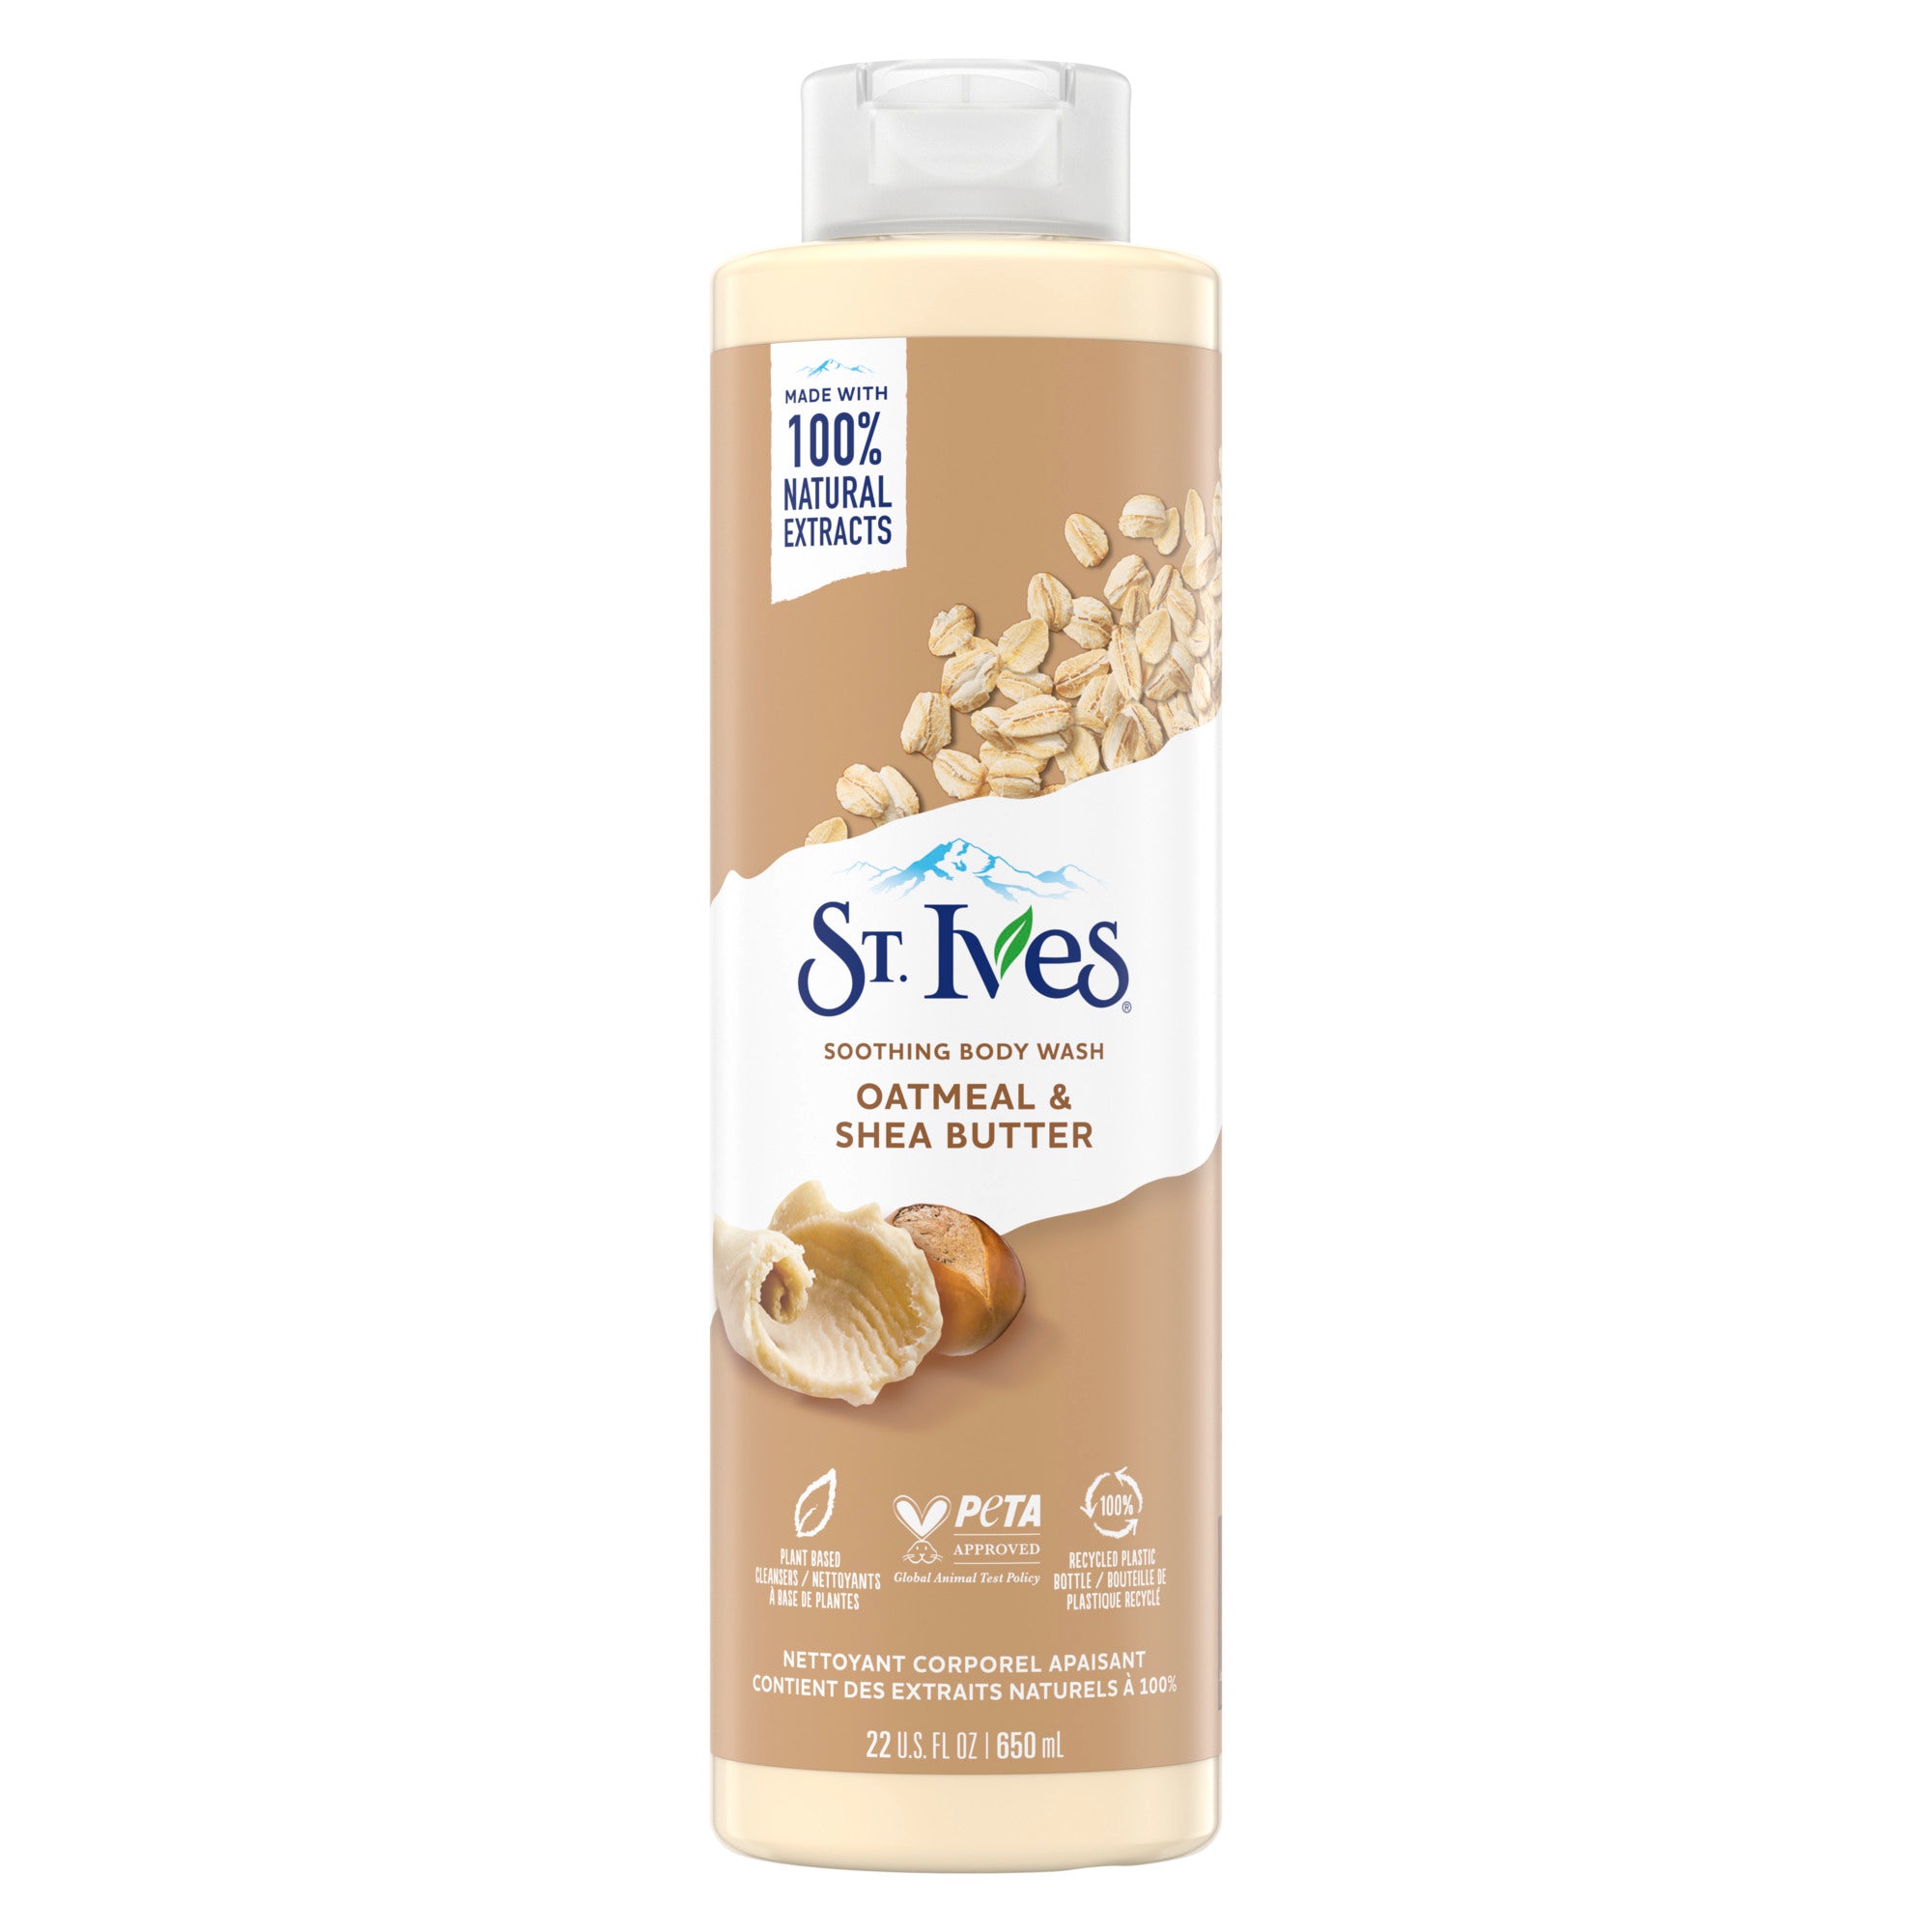 An image showing the front of the beige St.Ives Soothing Oatmeal & Shea Butter Body Wash 650ml product packaging.